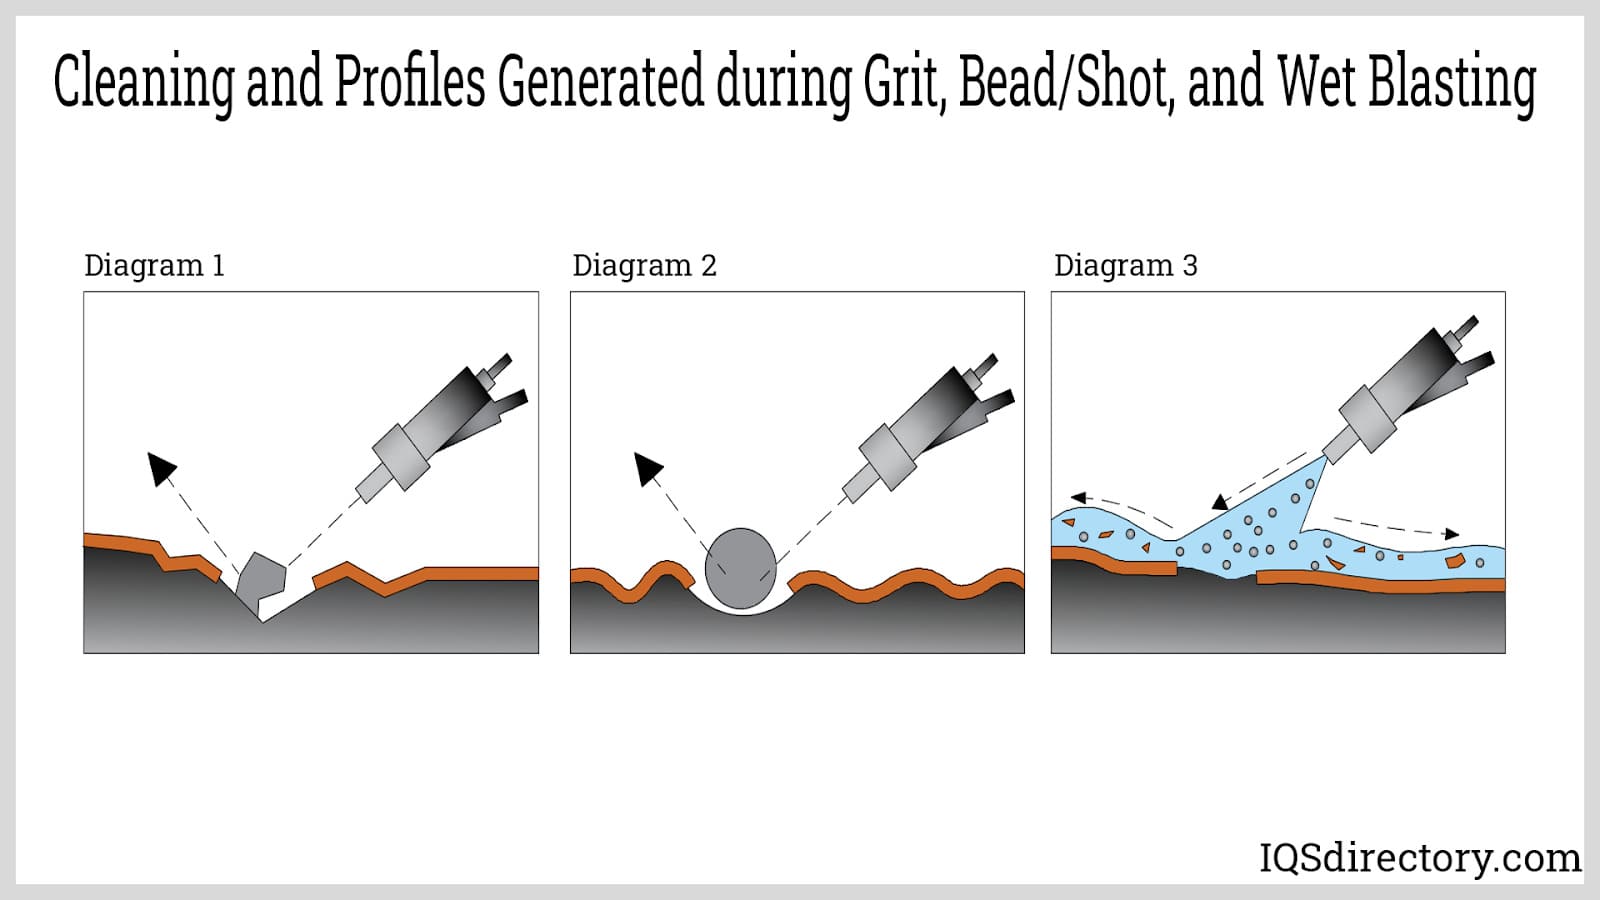 Cleaning and Profiles Generated during Grit, Bead/Shot, and Wet Blasting